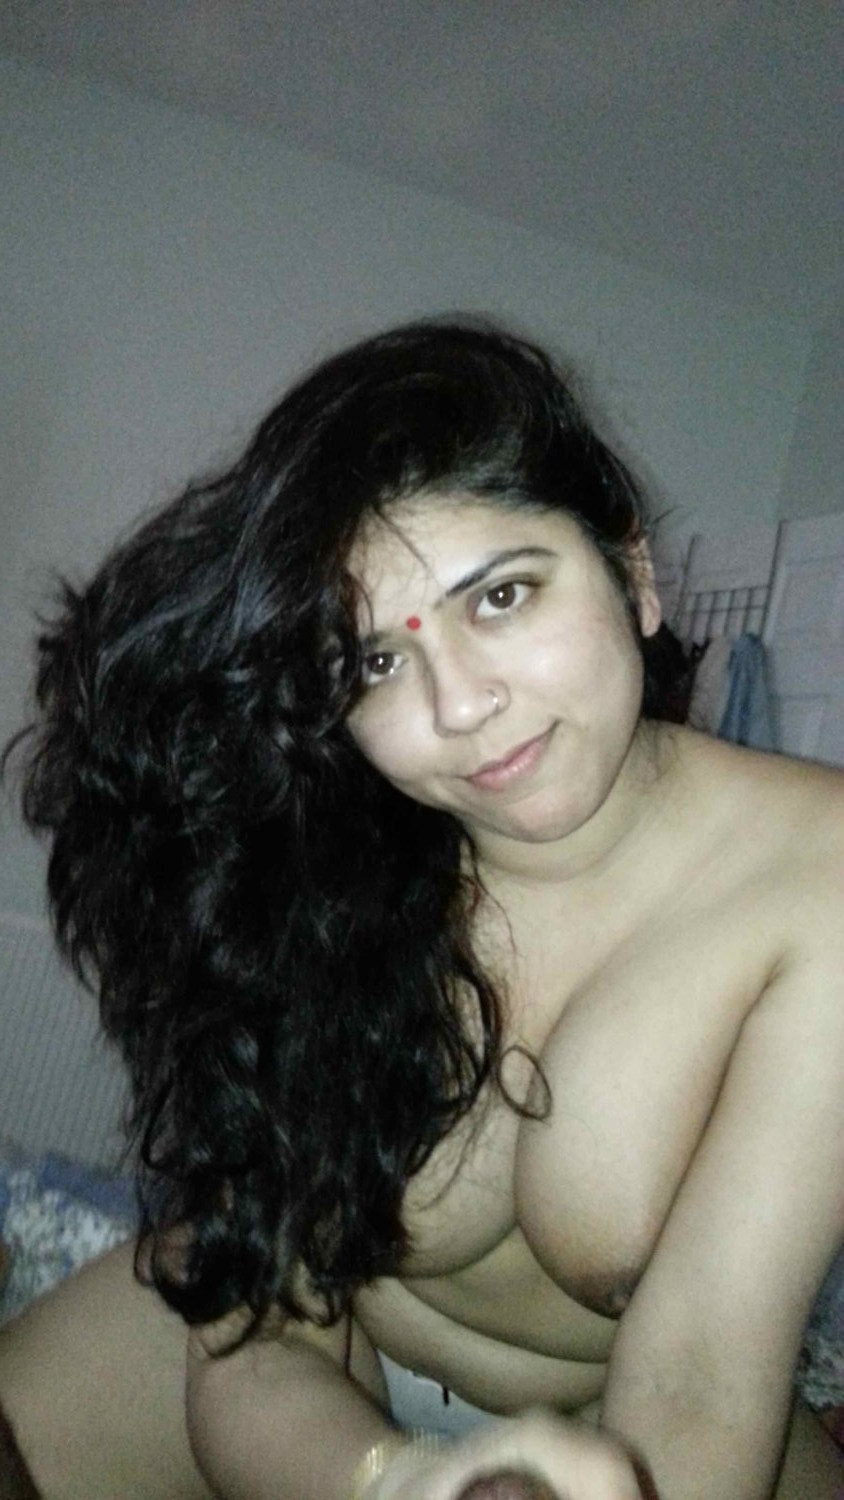 Hot indian wife - Porn Videos and Photos